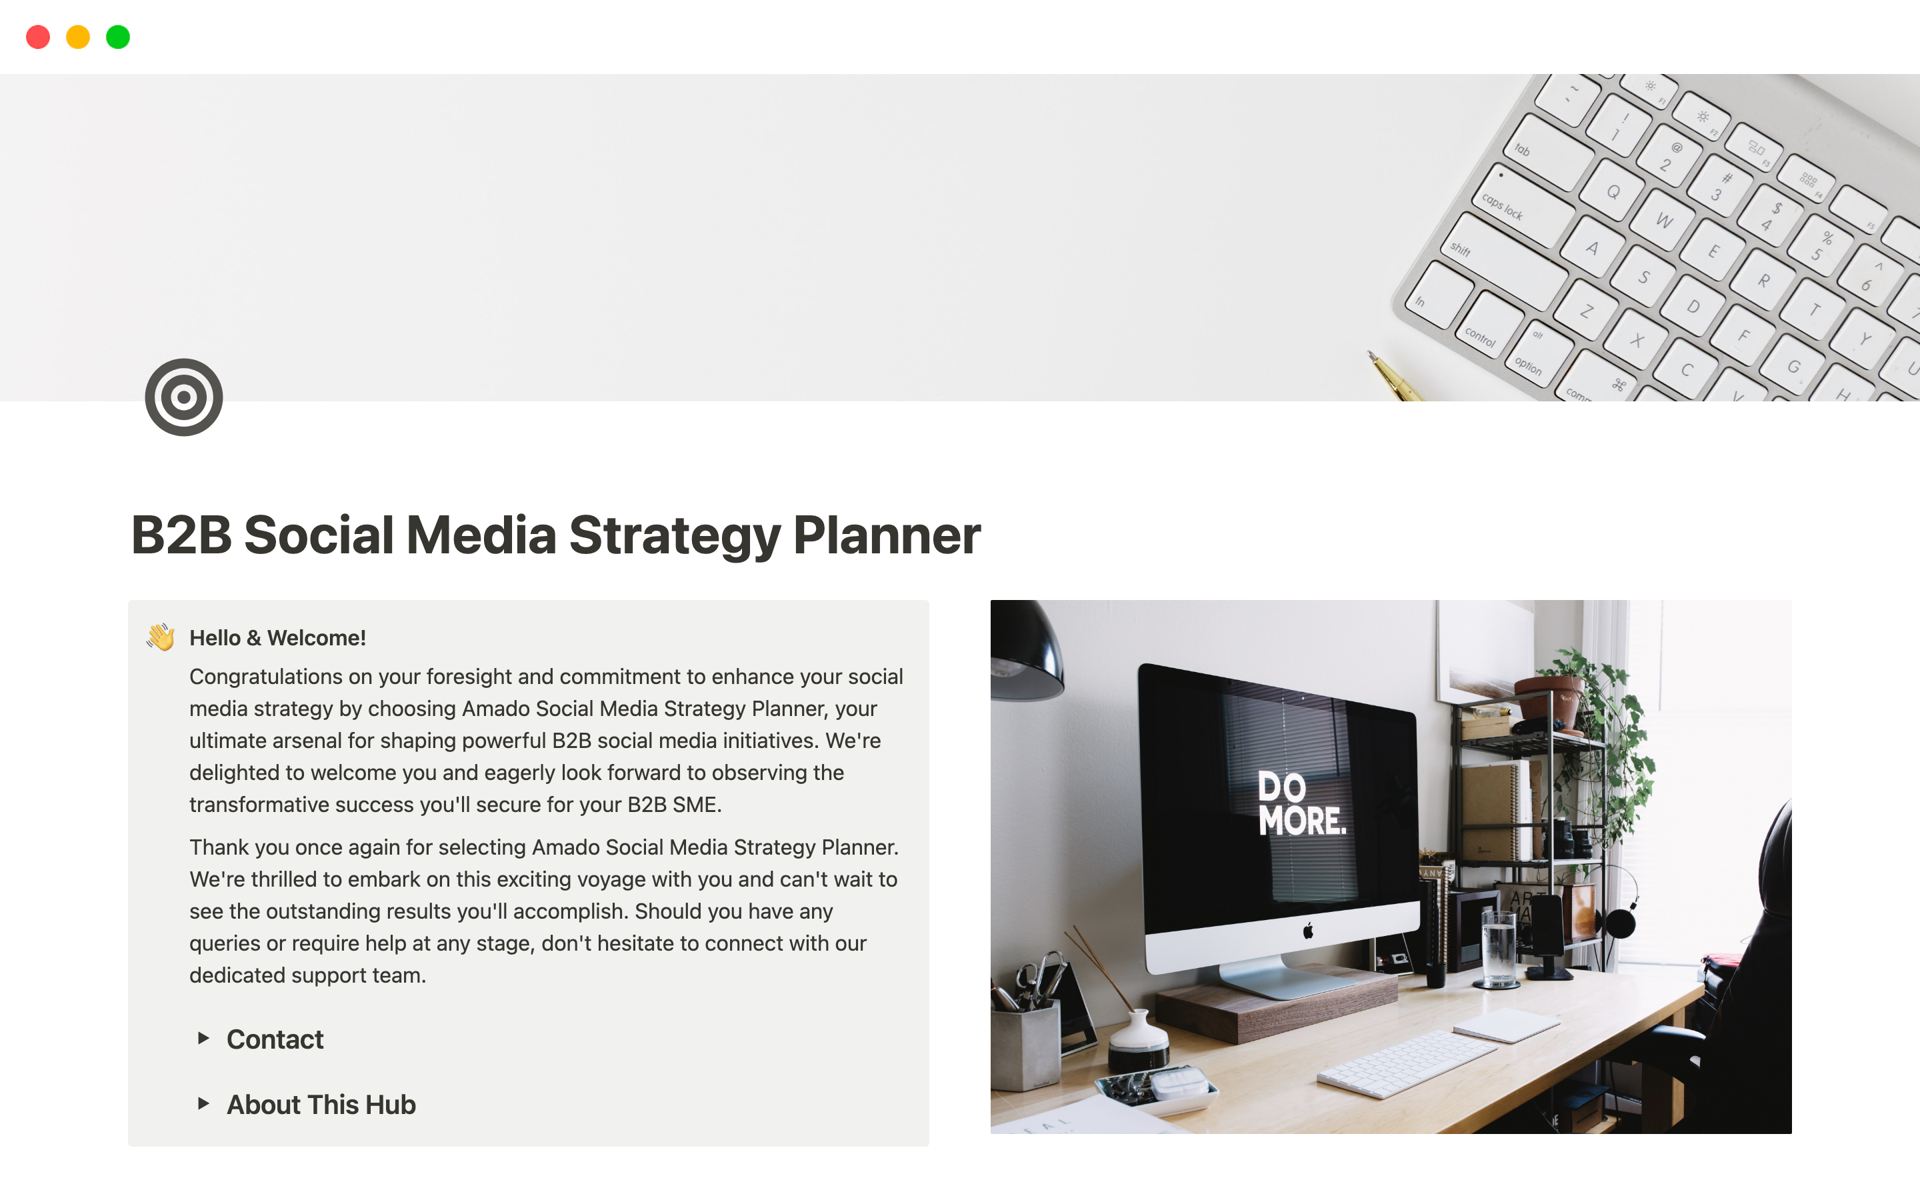 This B2B Social Media Toolkit empowers businesses with an all-in-one suite for effortless social media management. It includes guides, analytics, content tools, ad specs, a marketing book, and a calendar, coupled with insightful ad tracking and reporting features. 